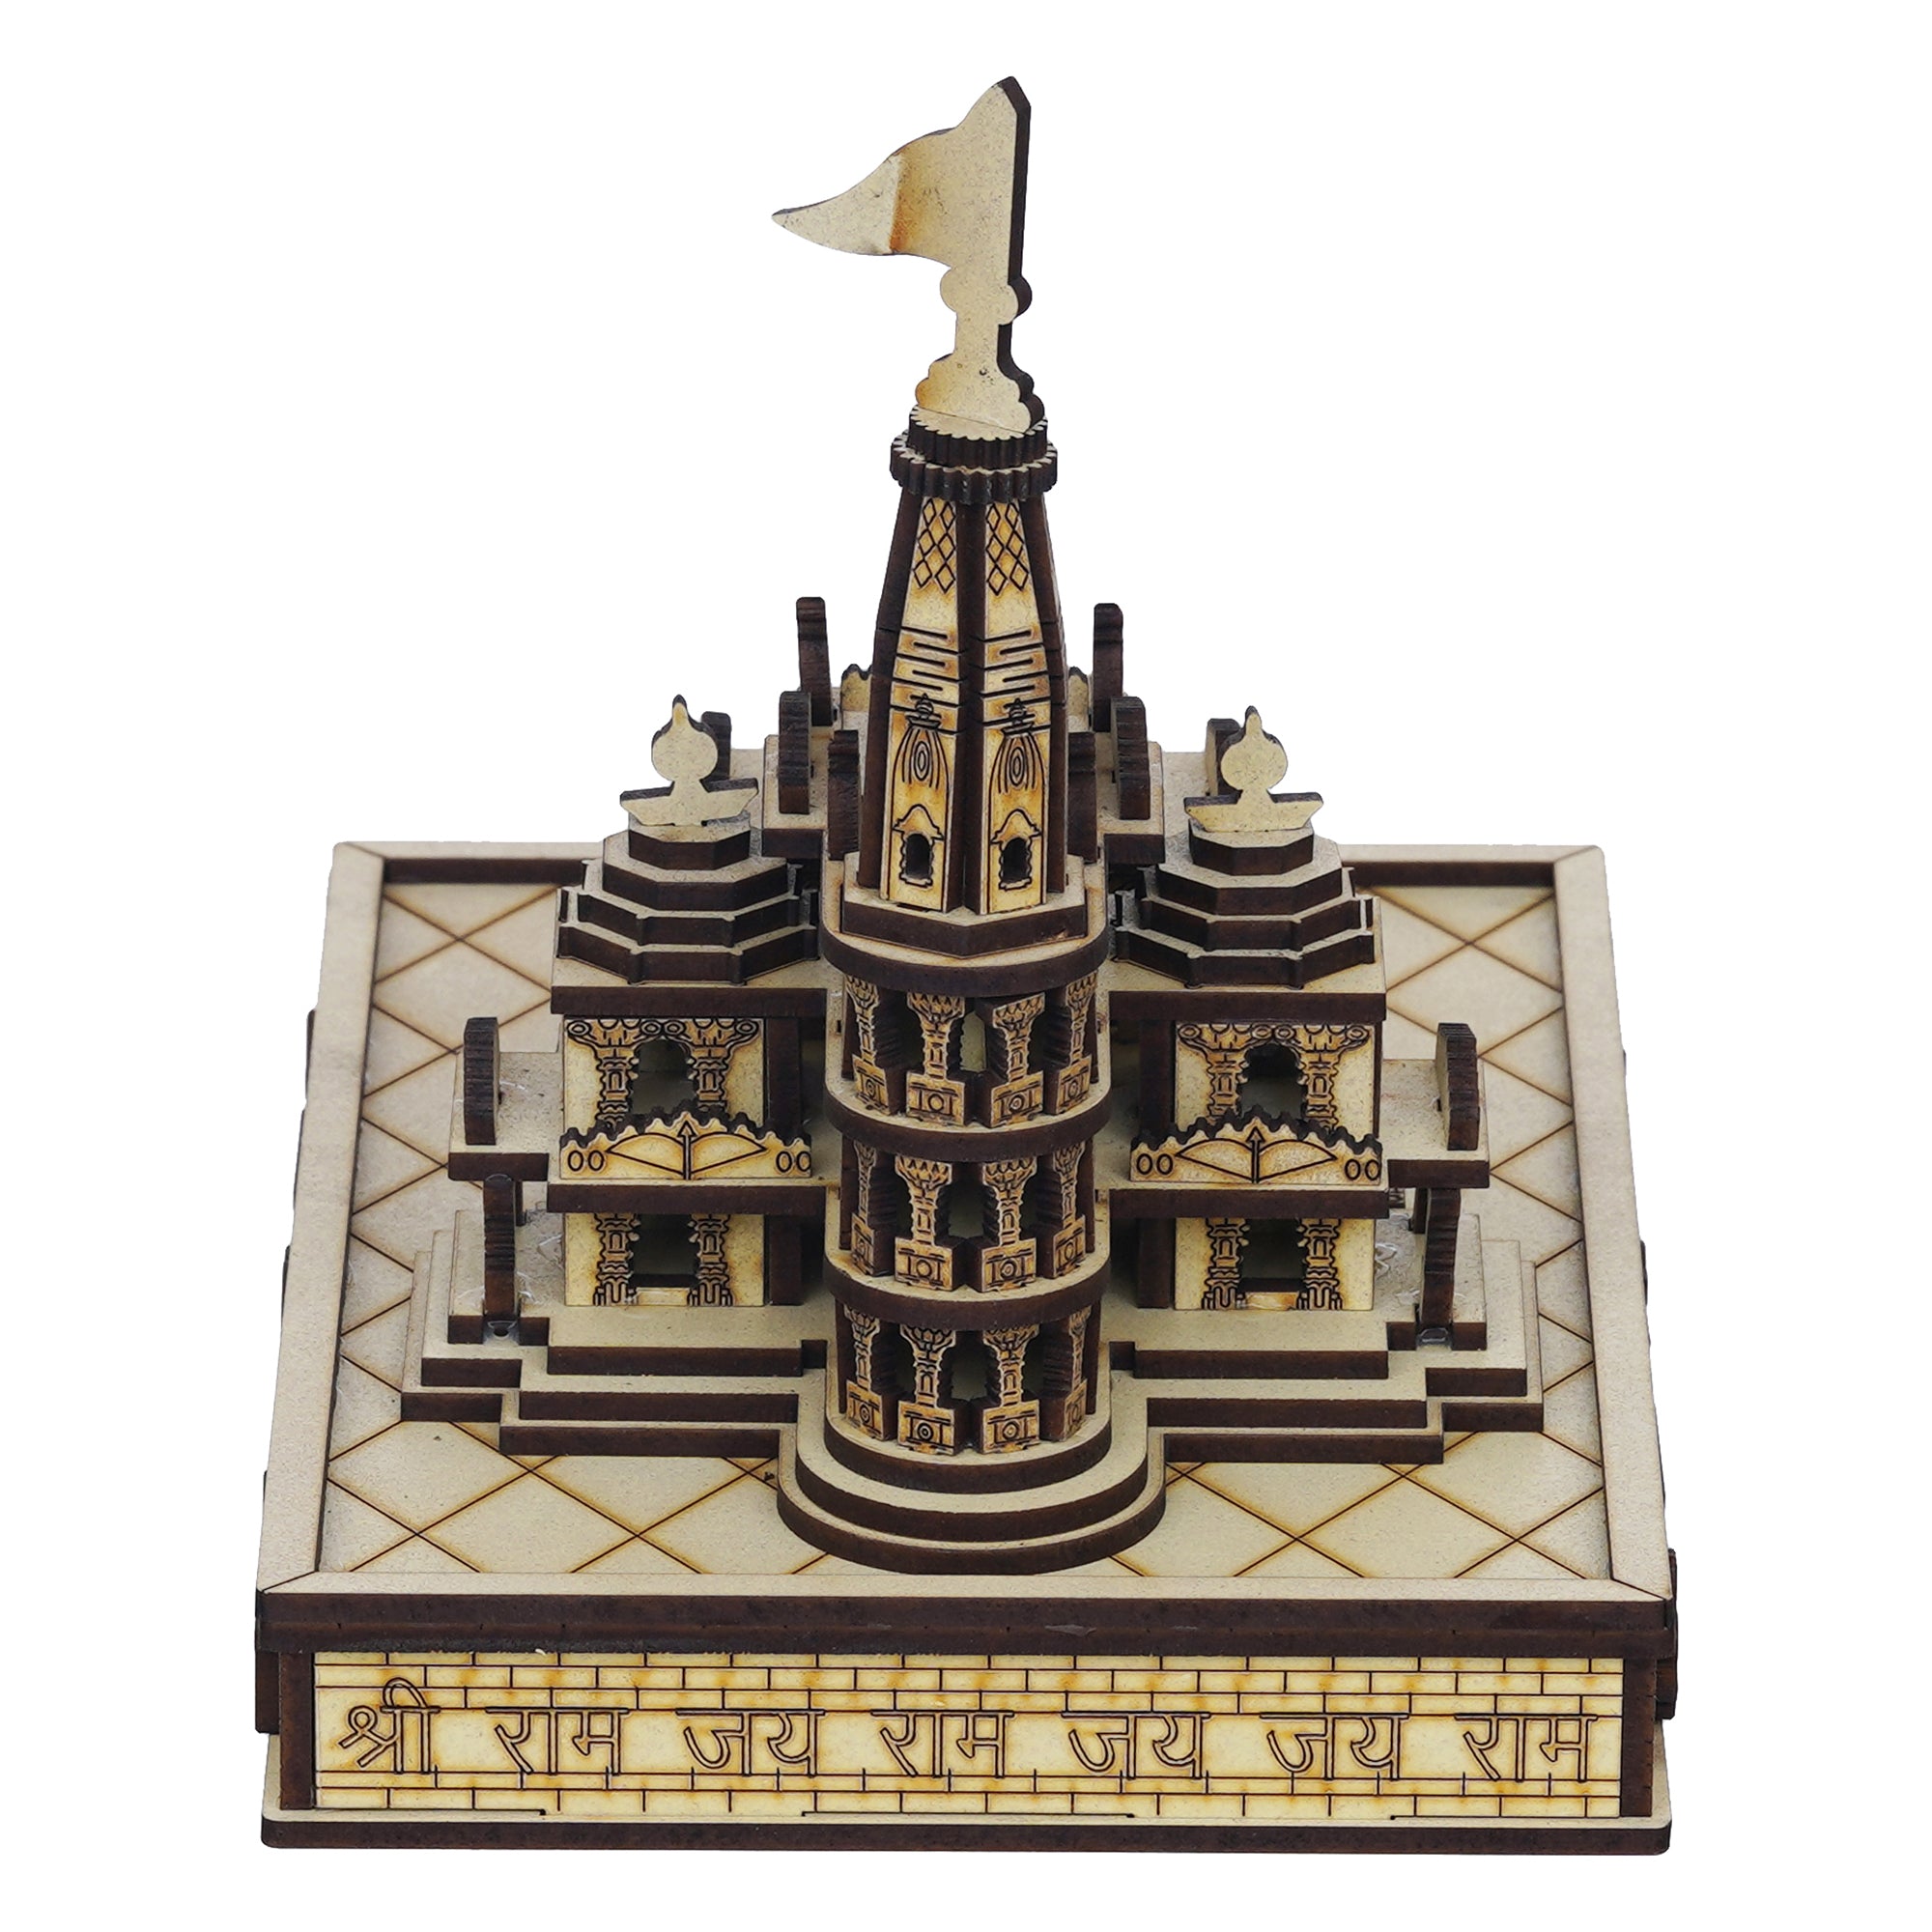 eCraftIndia Shri Ram Mandir Ayodhya Model with Light and Power Adapter - Wooden MDF Craftsmanship Authentic Designer Temple with Protective Gift Box - Ideal for Home Temple, Decor, and Spiritual Gifting 8